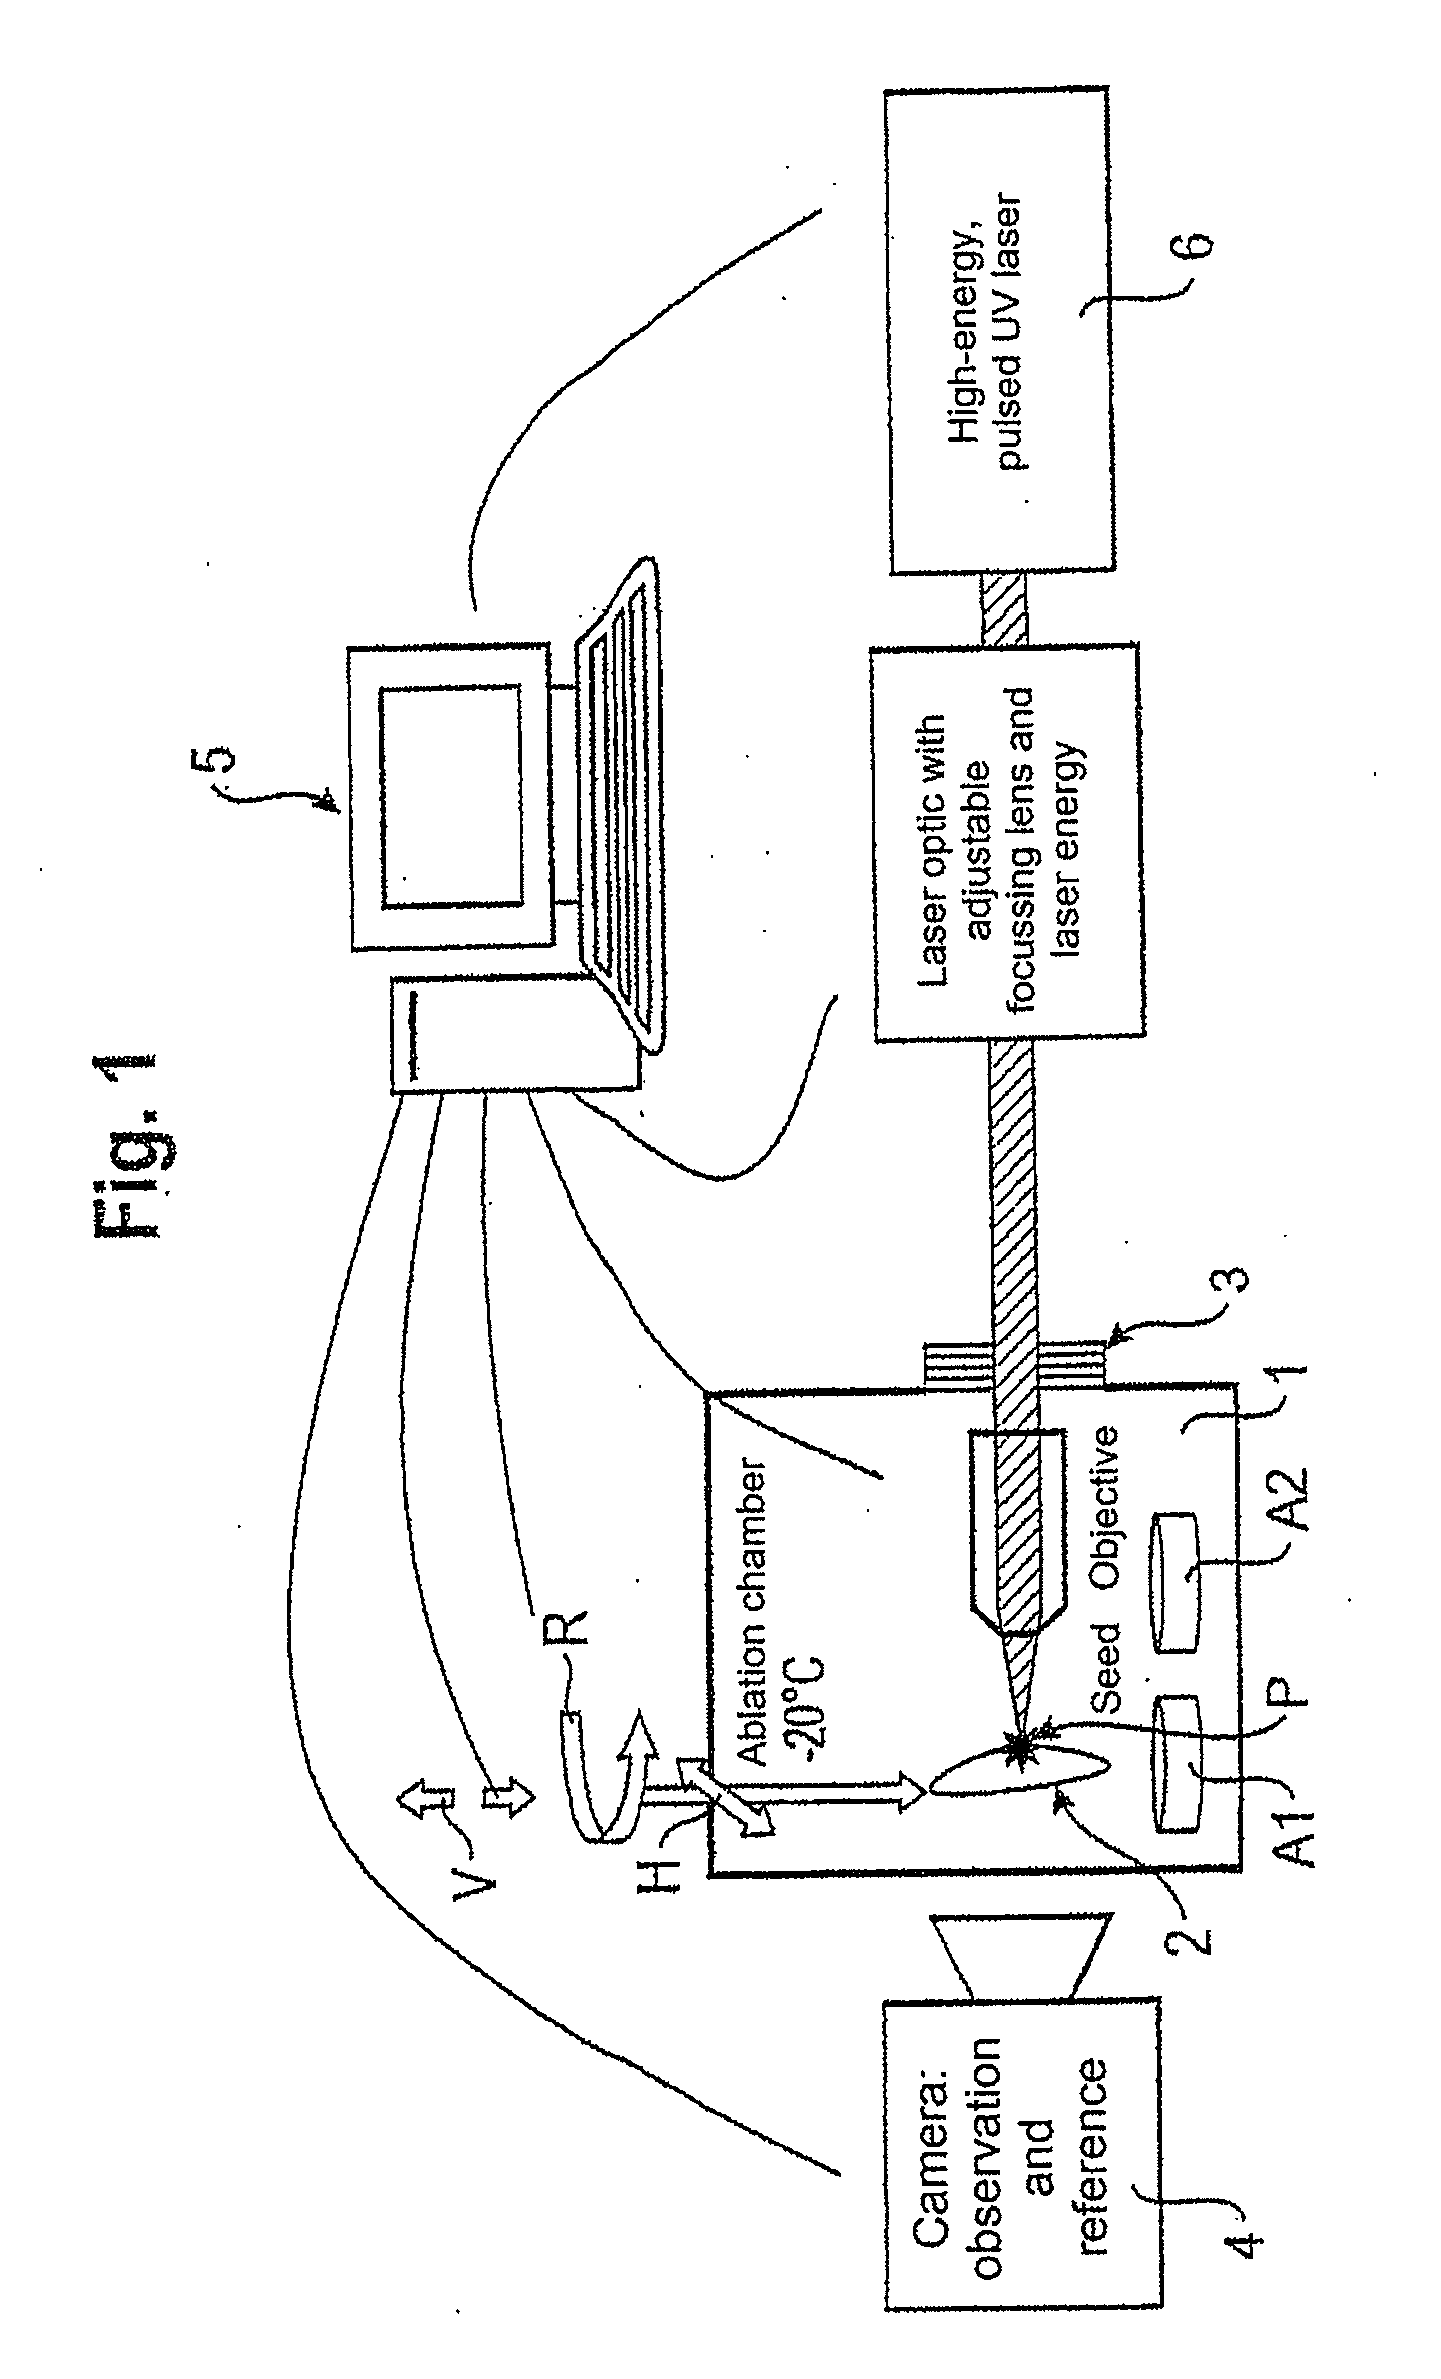 Method and device for three dimensional microdissection